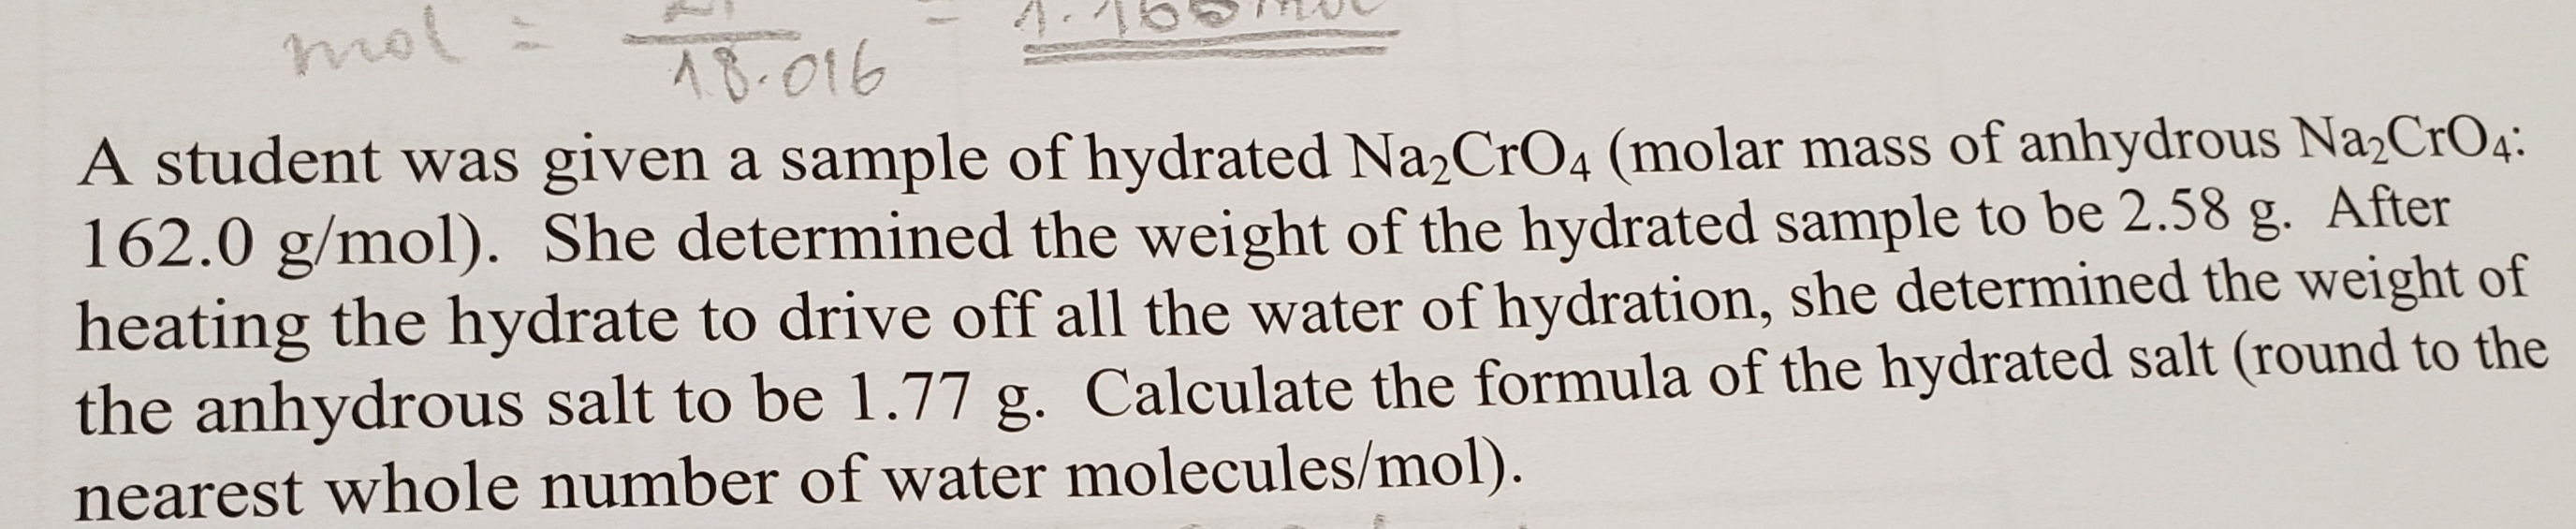 mol
AB-016
A student was given a sample of hydrated Na2CrO4 (molar mass of anhydrous Na2CrO4.
162.0 g/mol). She determined the weight of the hydrated sample to be 2.58
heating the hydrate to drive off all the water of hydration, she determined the weight of
the anhydrous salt to be 1.77 g. Calculate the formula of the hydrated salt (round to the
nearest whole number of water molecules/mol).
After
g.
